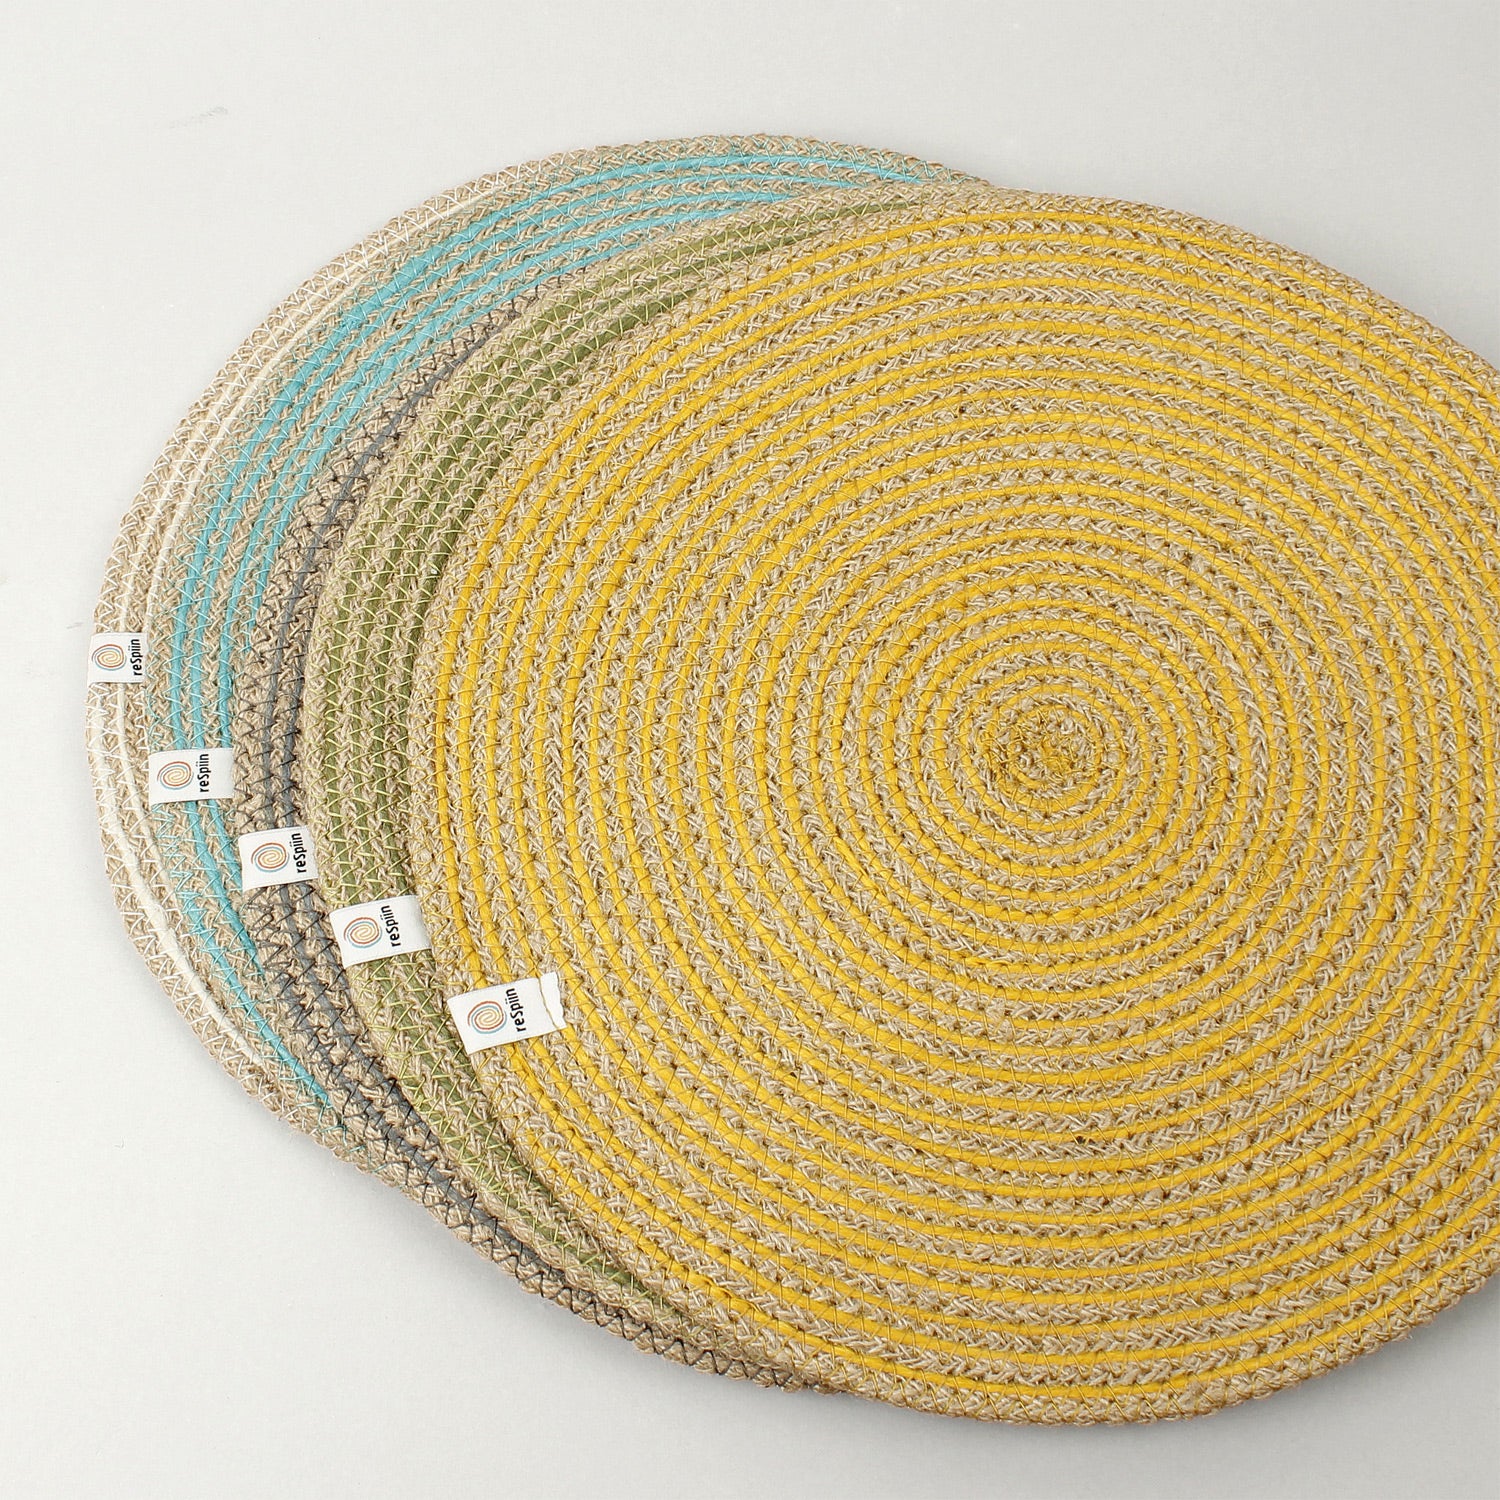 Jute Spiral Table Placemats